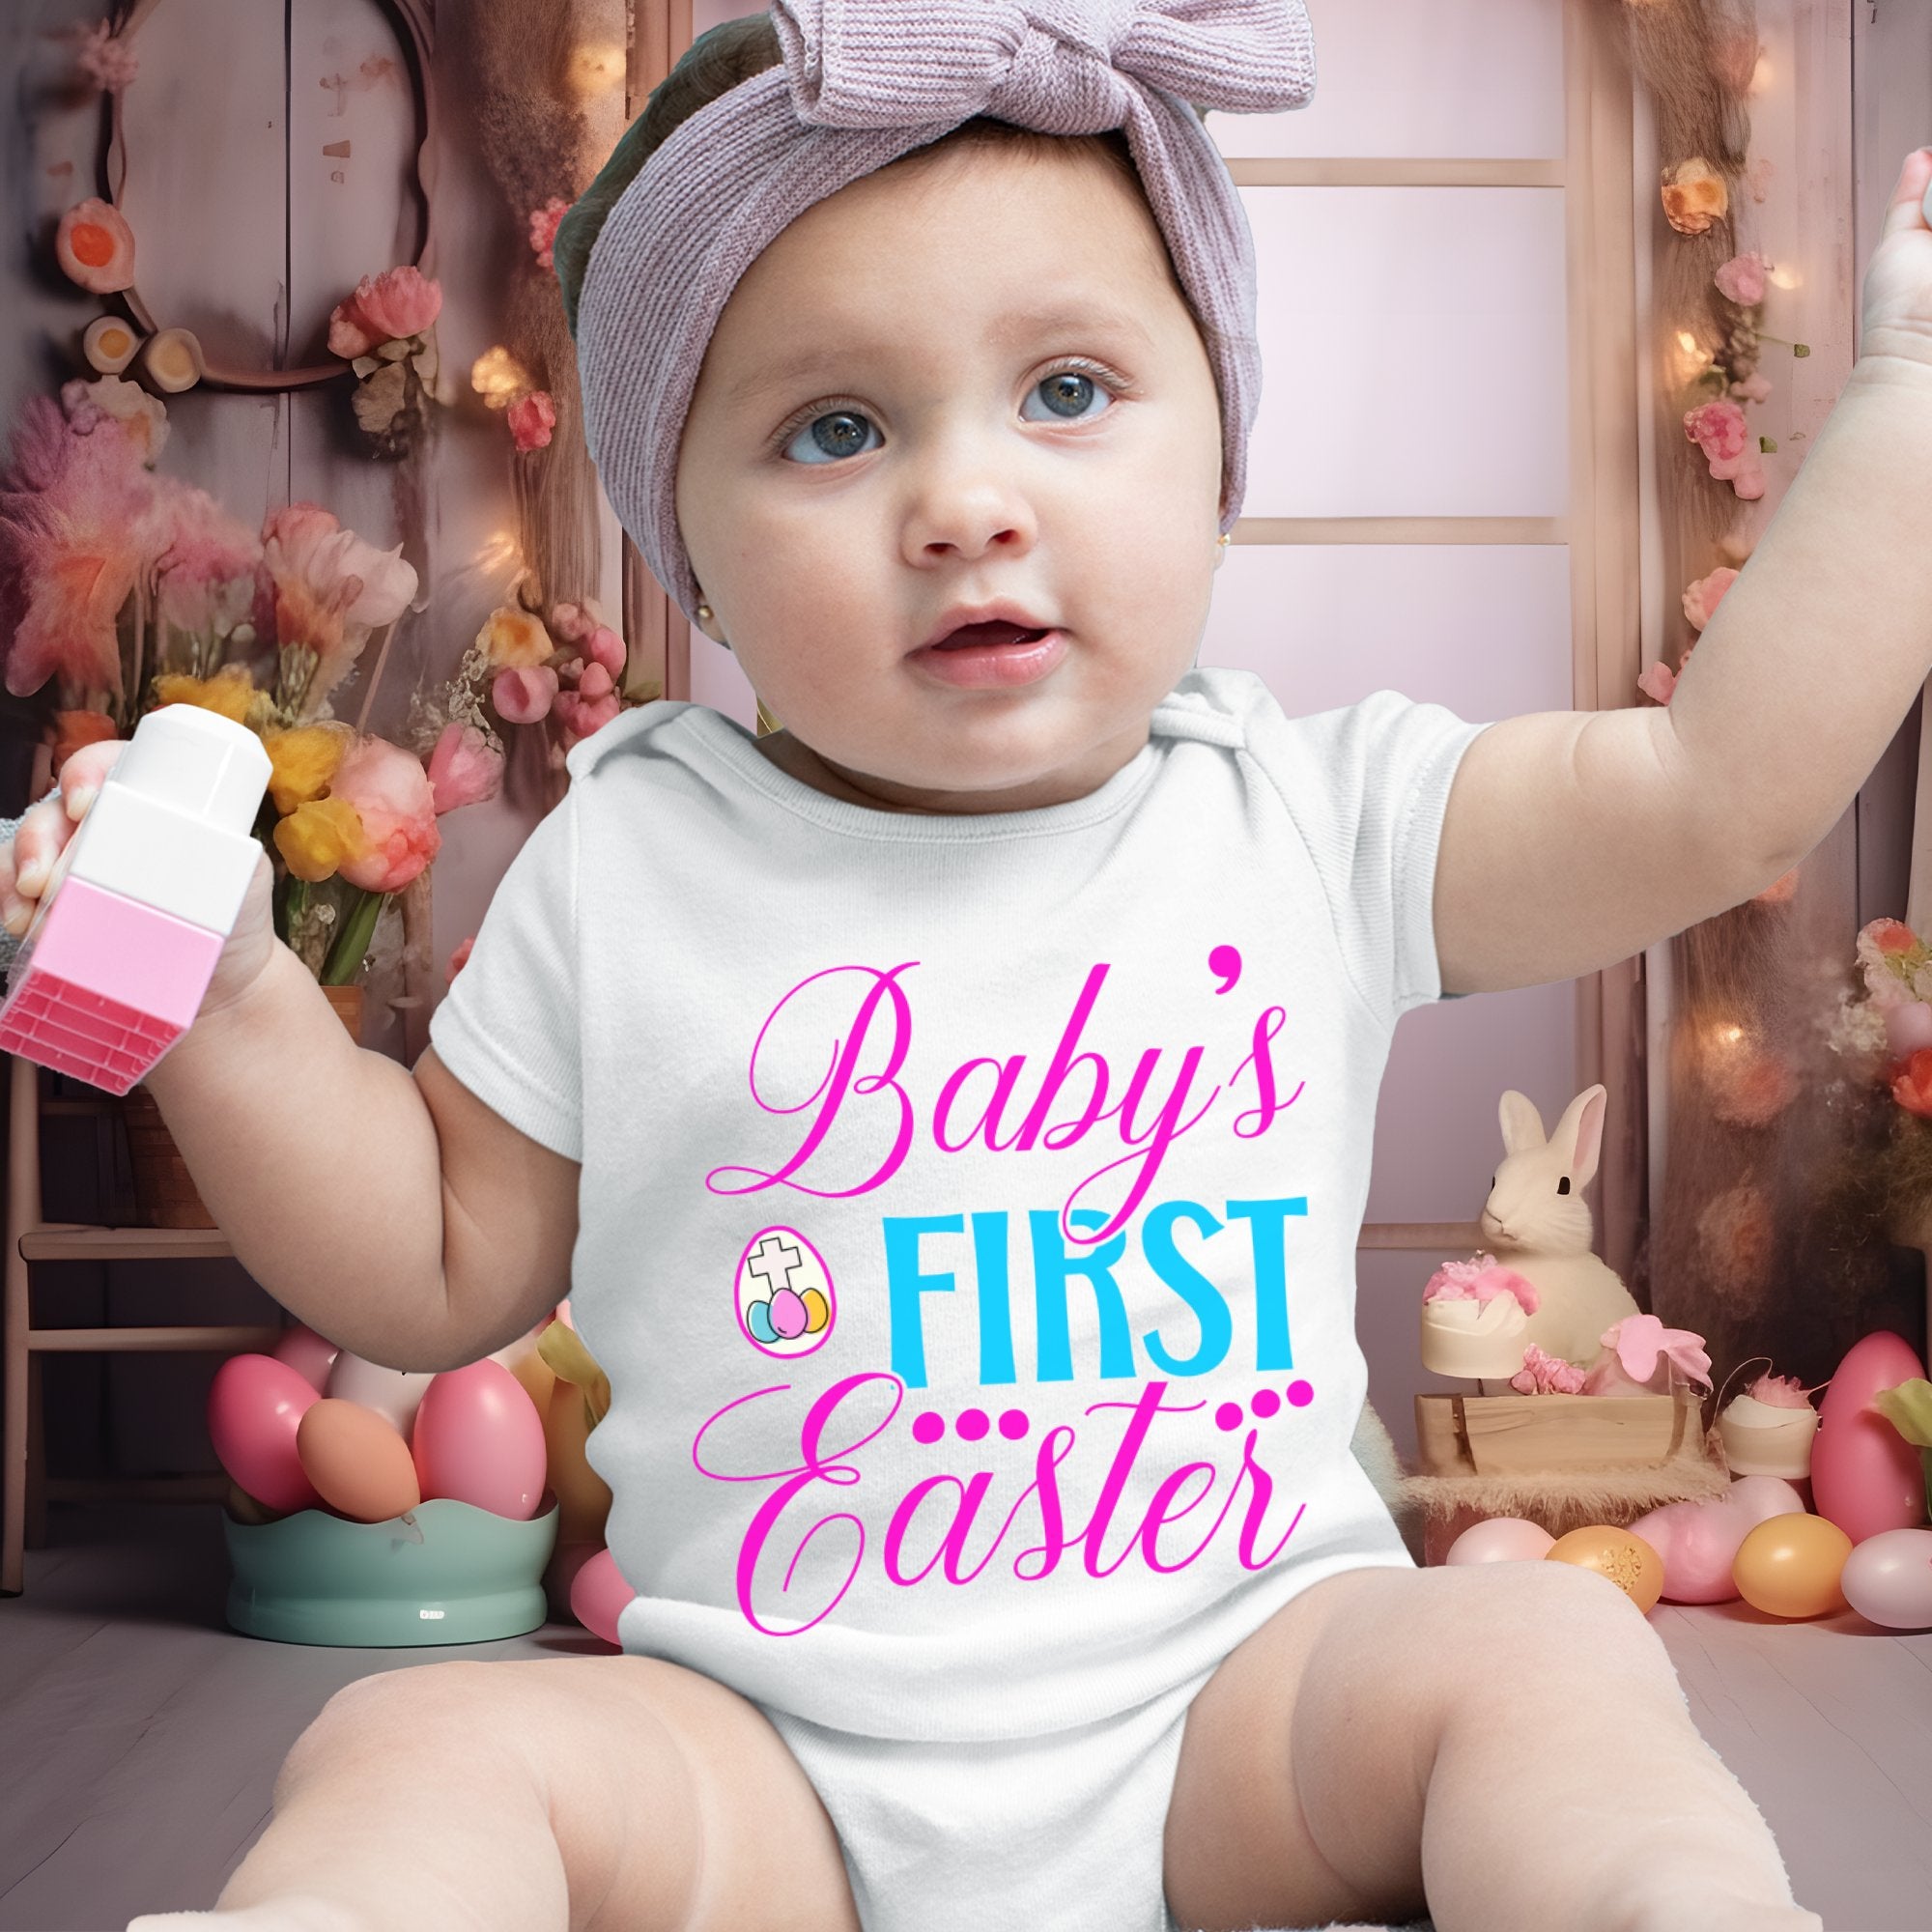 Baby's First Easter Cross Eggs Infant Fine Jersey Bodysuit Size: 6mo Color: White Jesus Passion Apparel